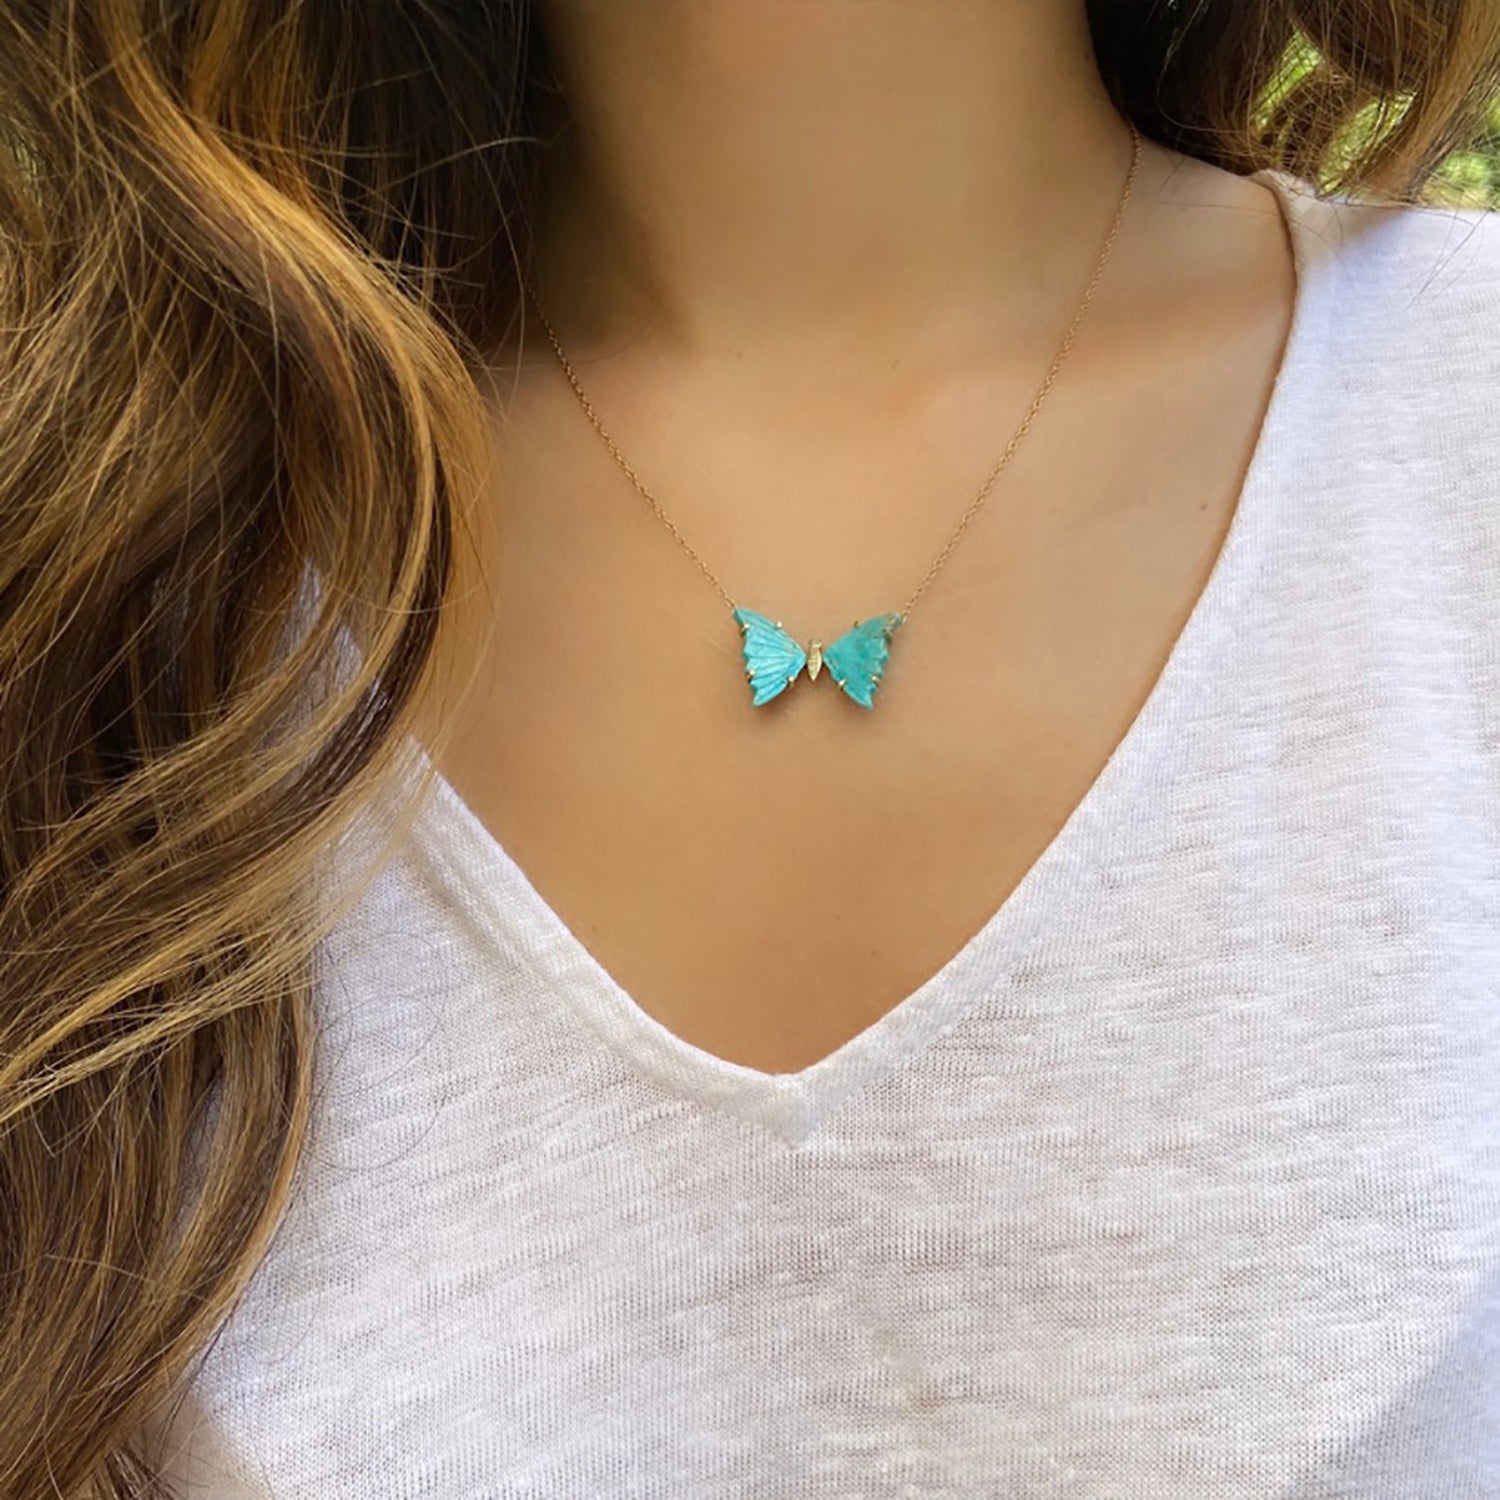 Turquoise Butterfly Necklace With White Topaz